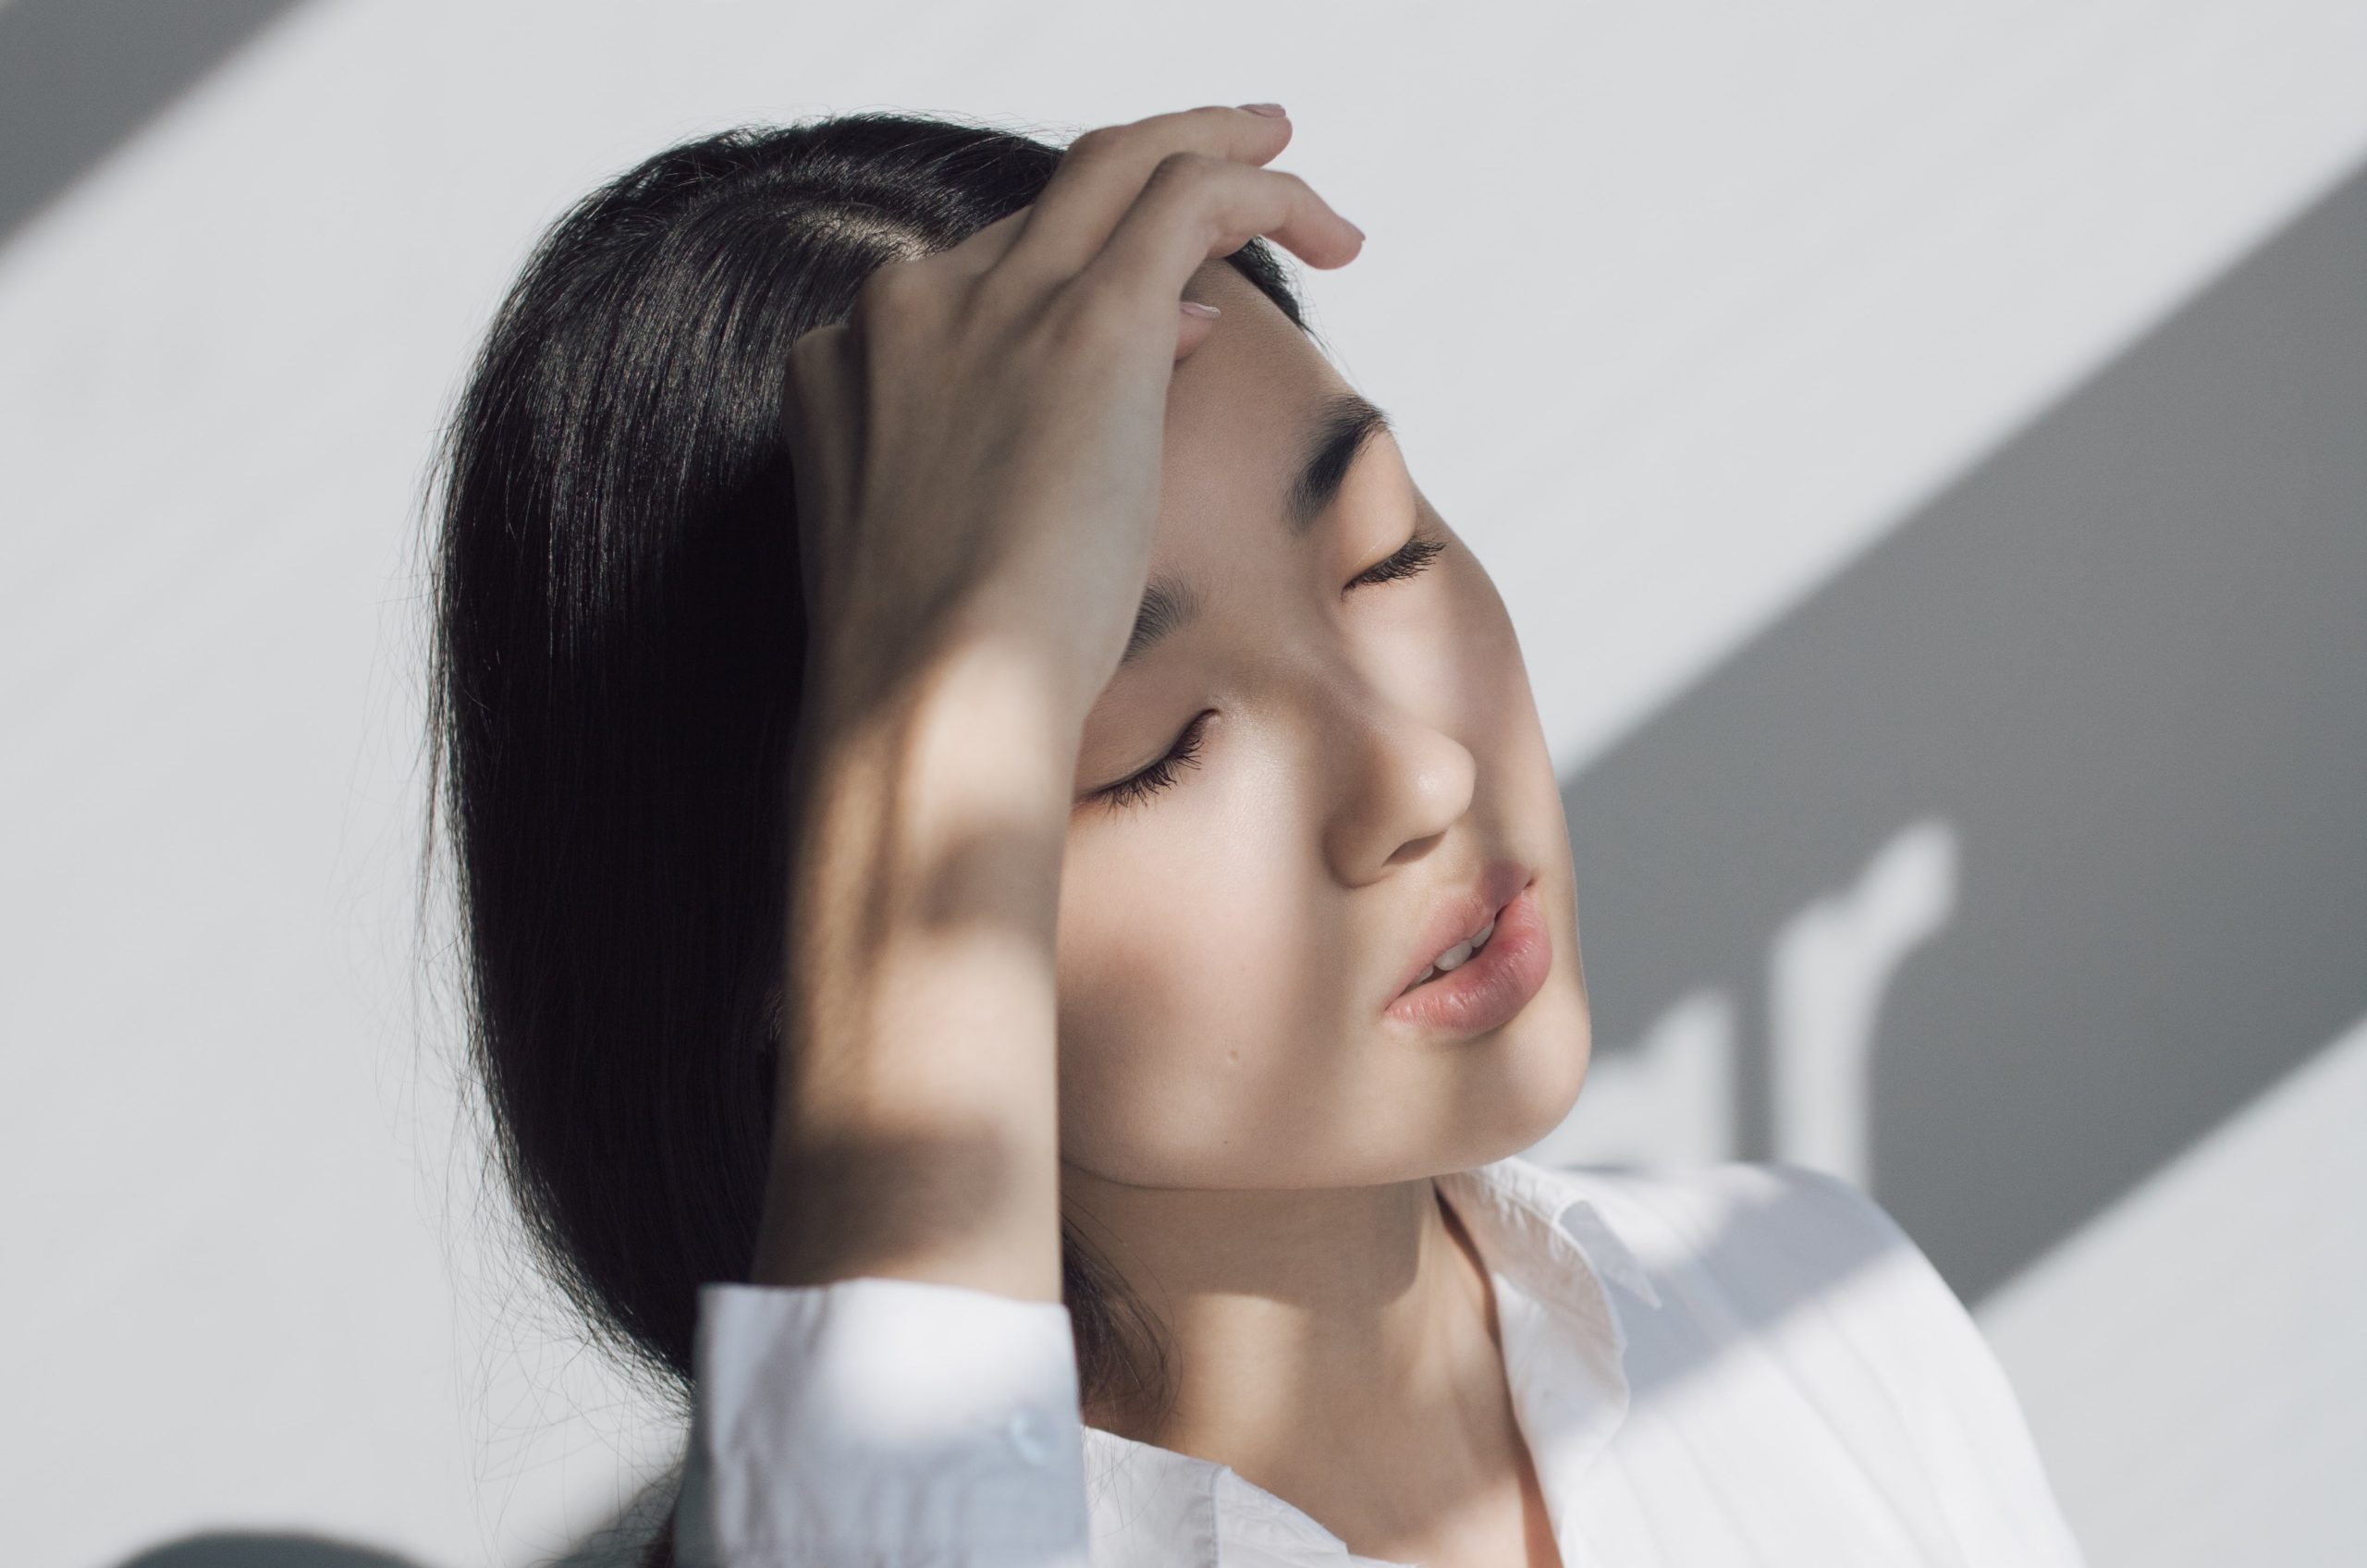 A Korean girl in a white shirt with her eyes closed and her hand by her forehead